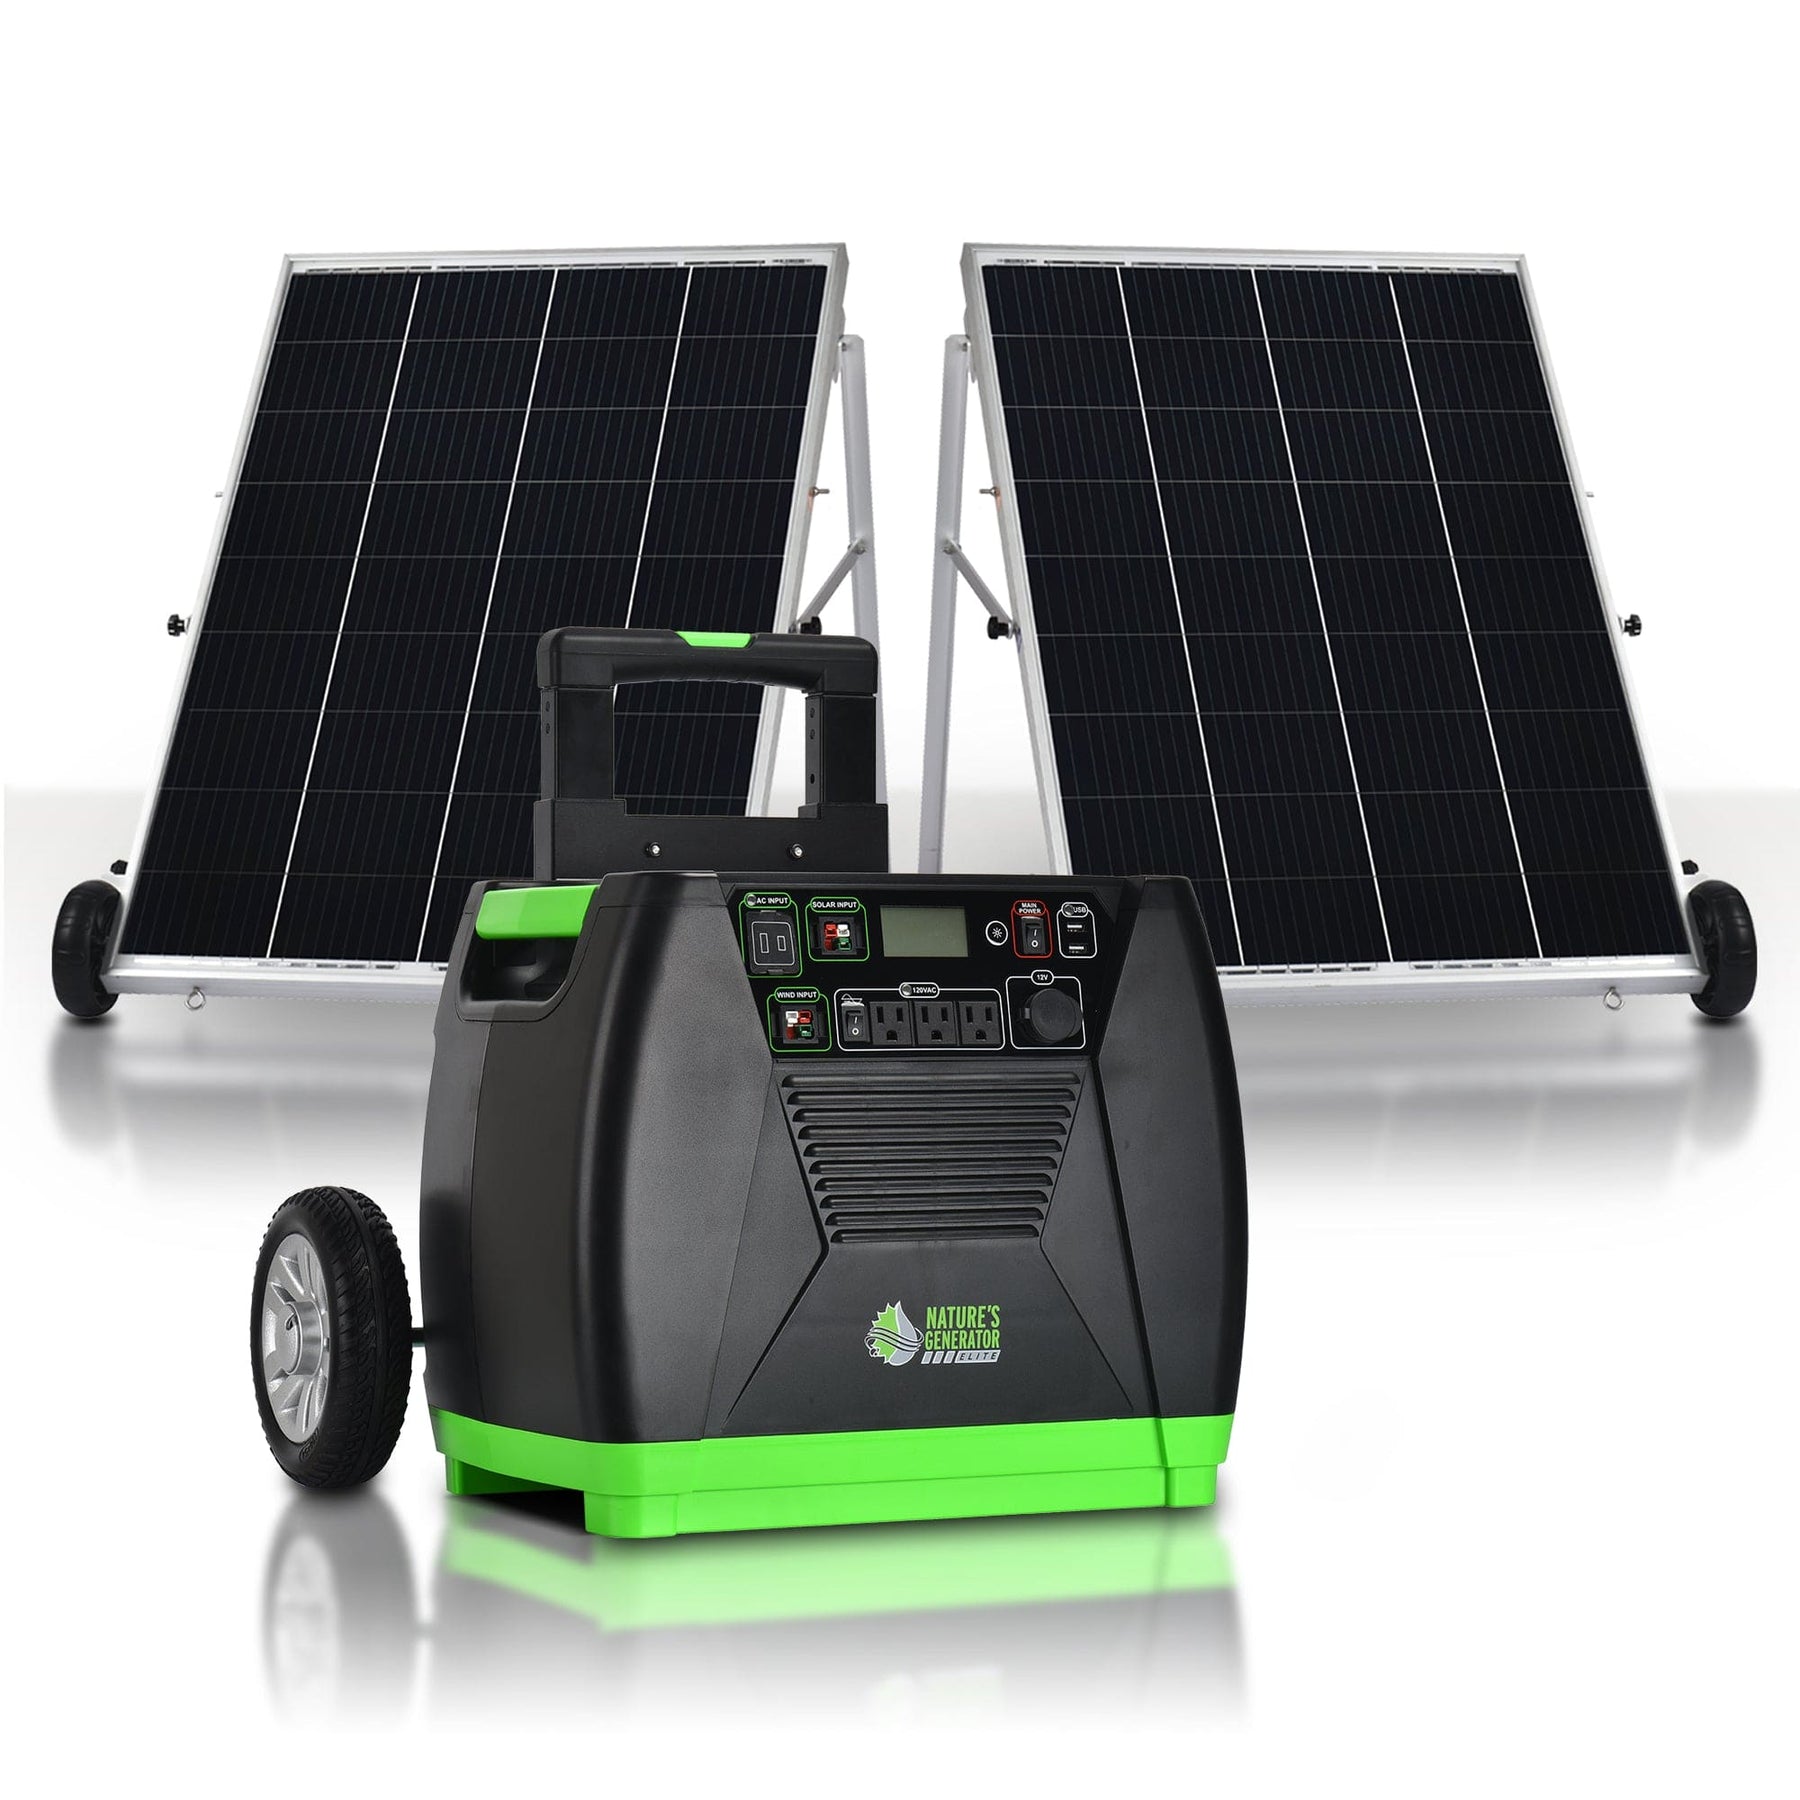 Green Deals: Buture 300W Power Station for Solar at $180, more